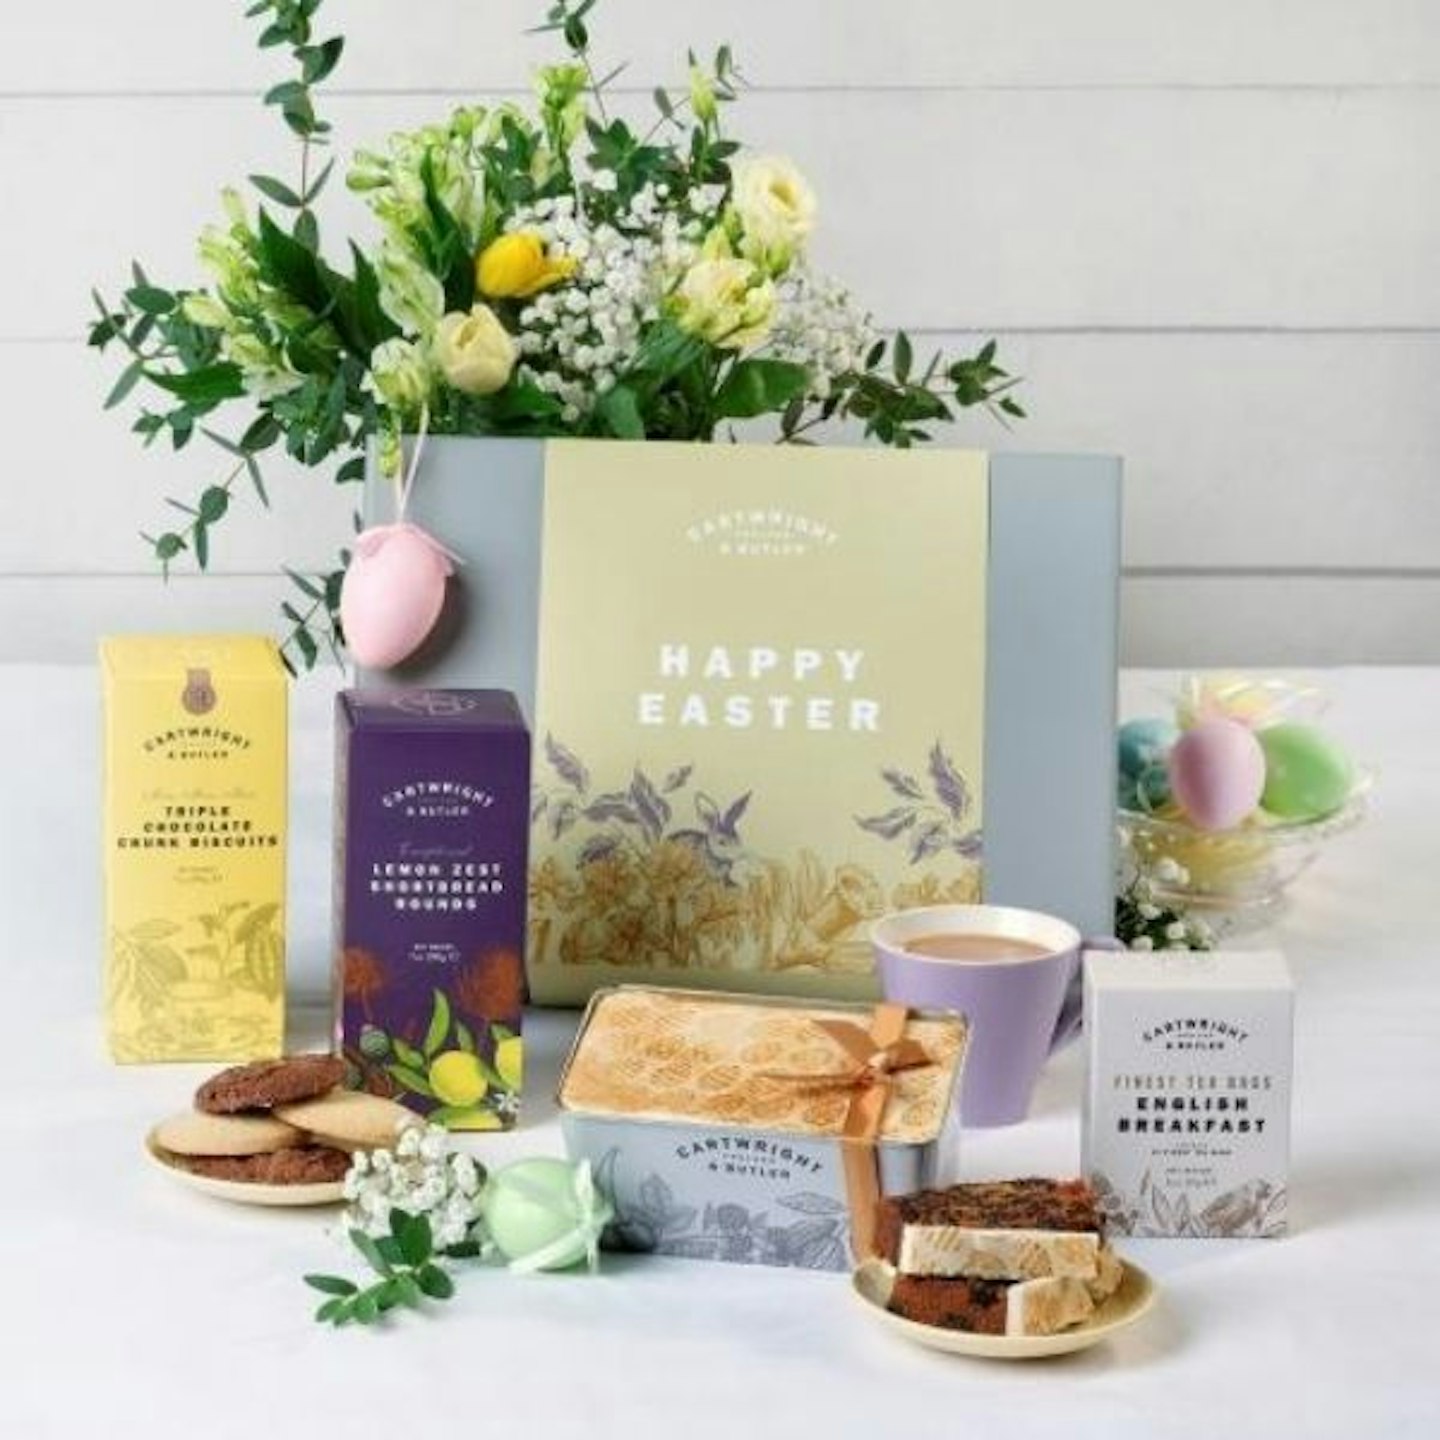 The Happy Easter Gift Box